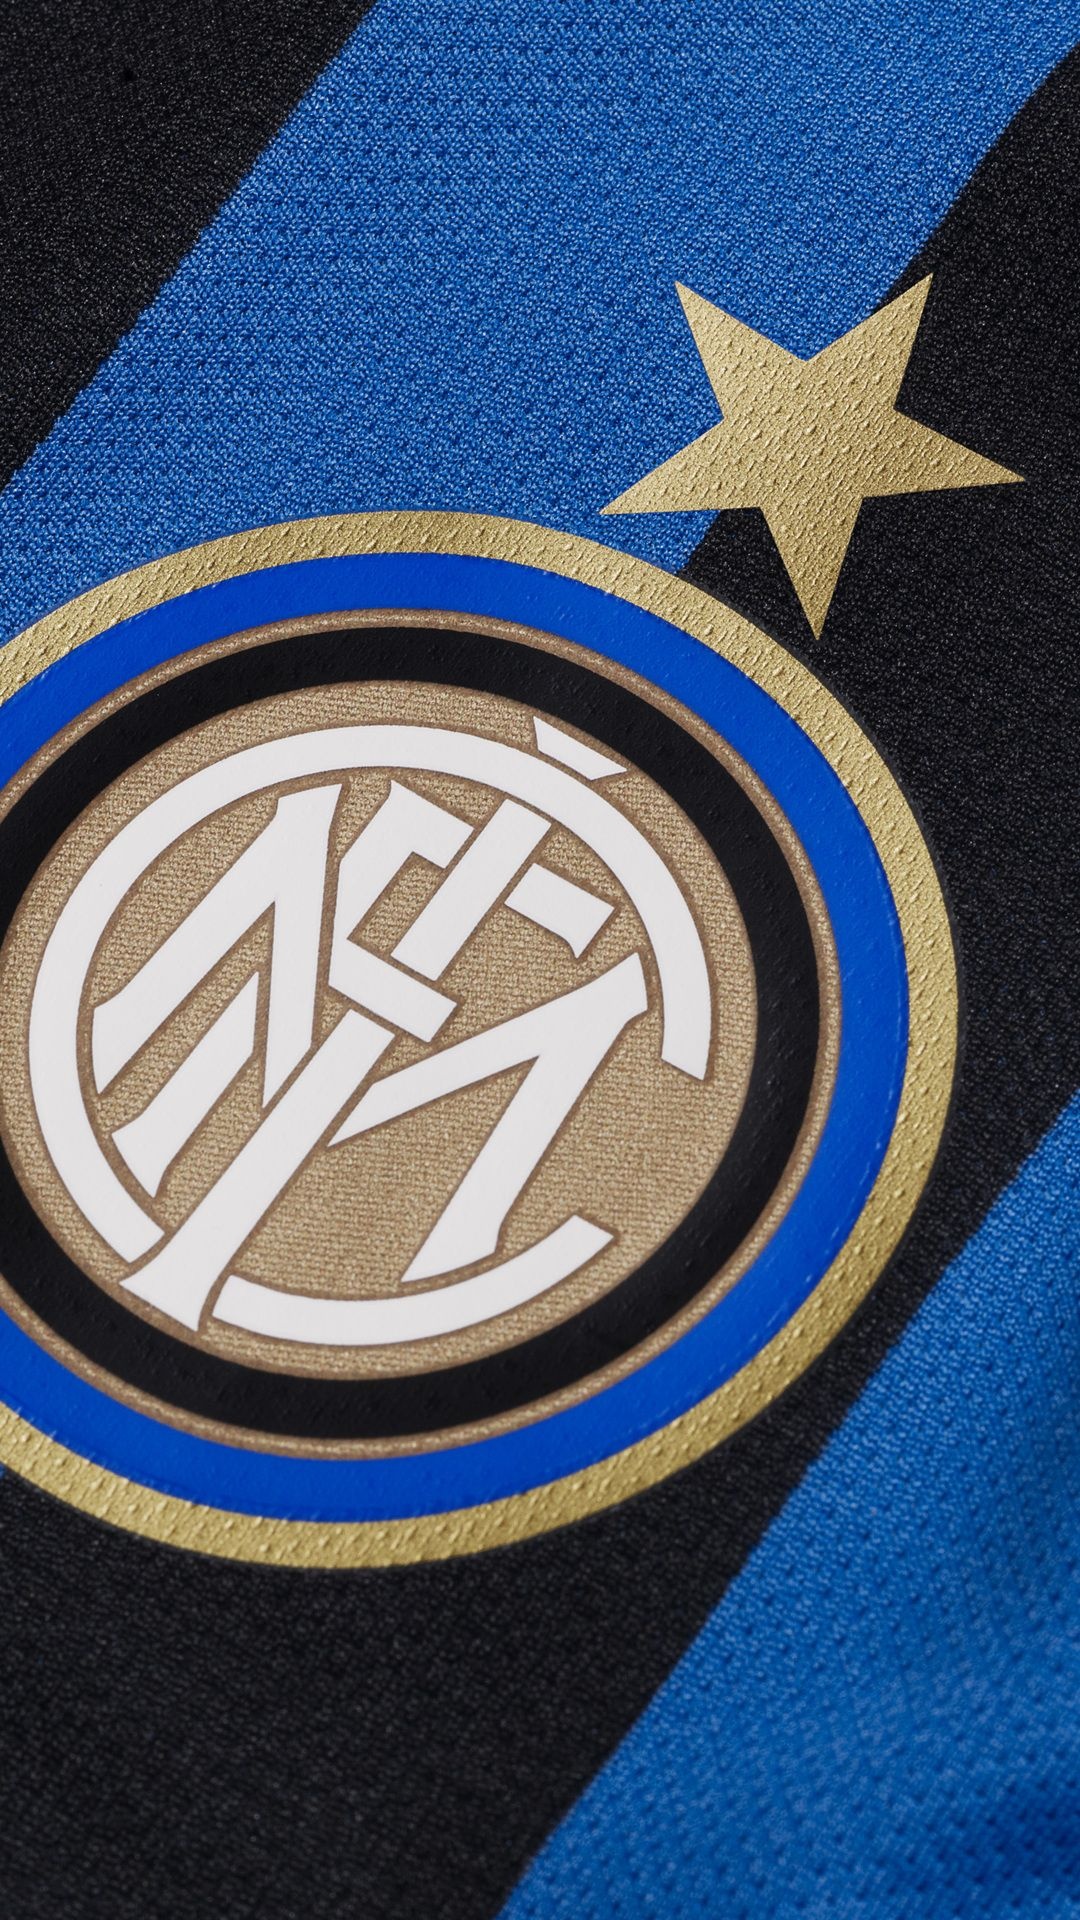 Inter: The only club in Italian football to have never been relegated from the top division. 1080x1920 Full HD Background.